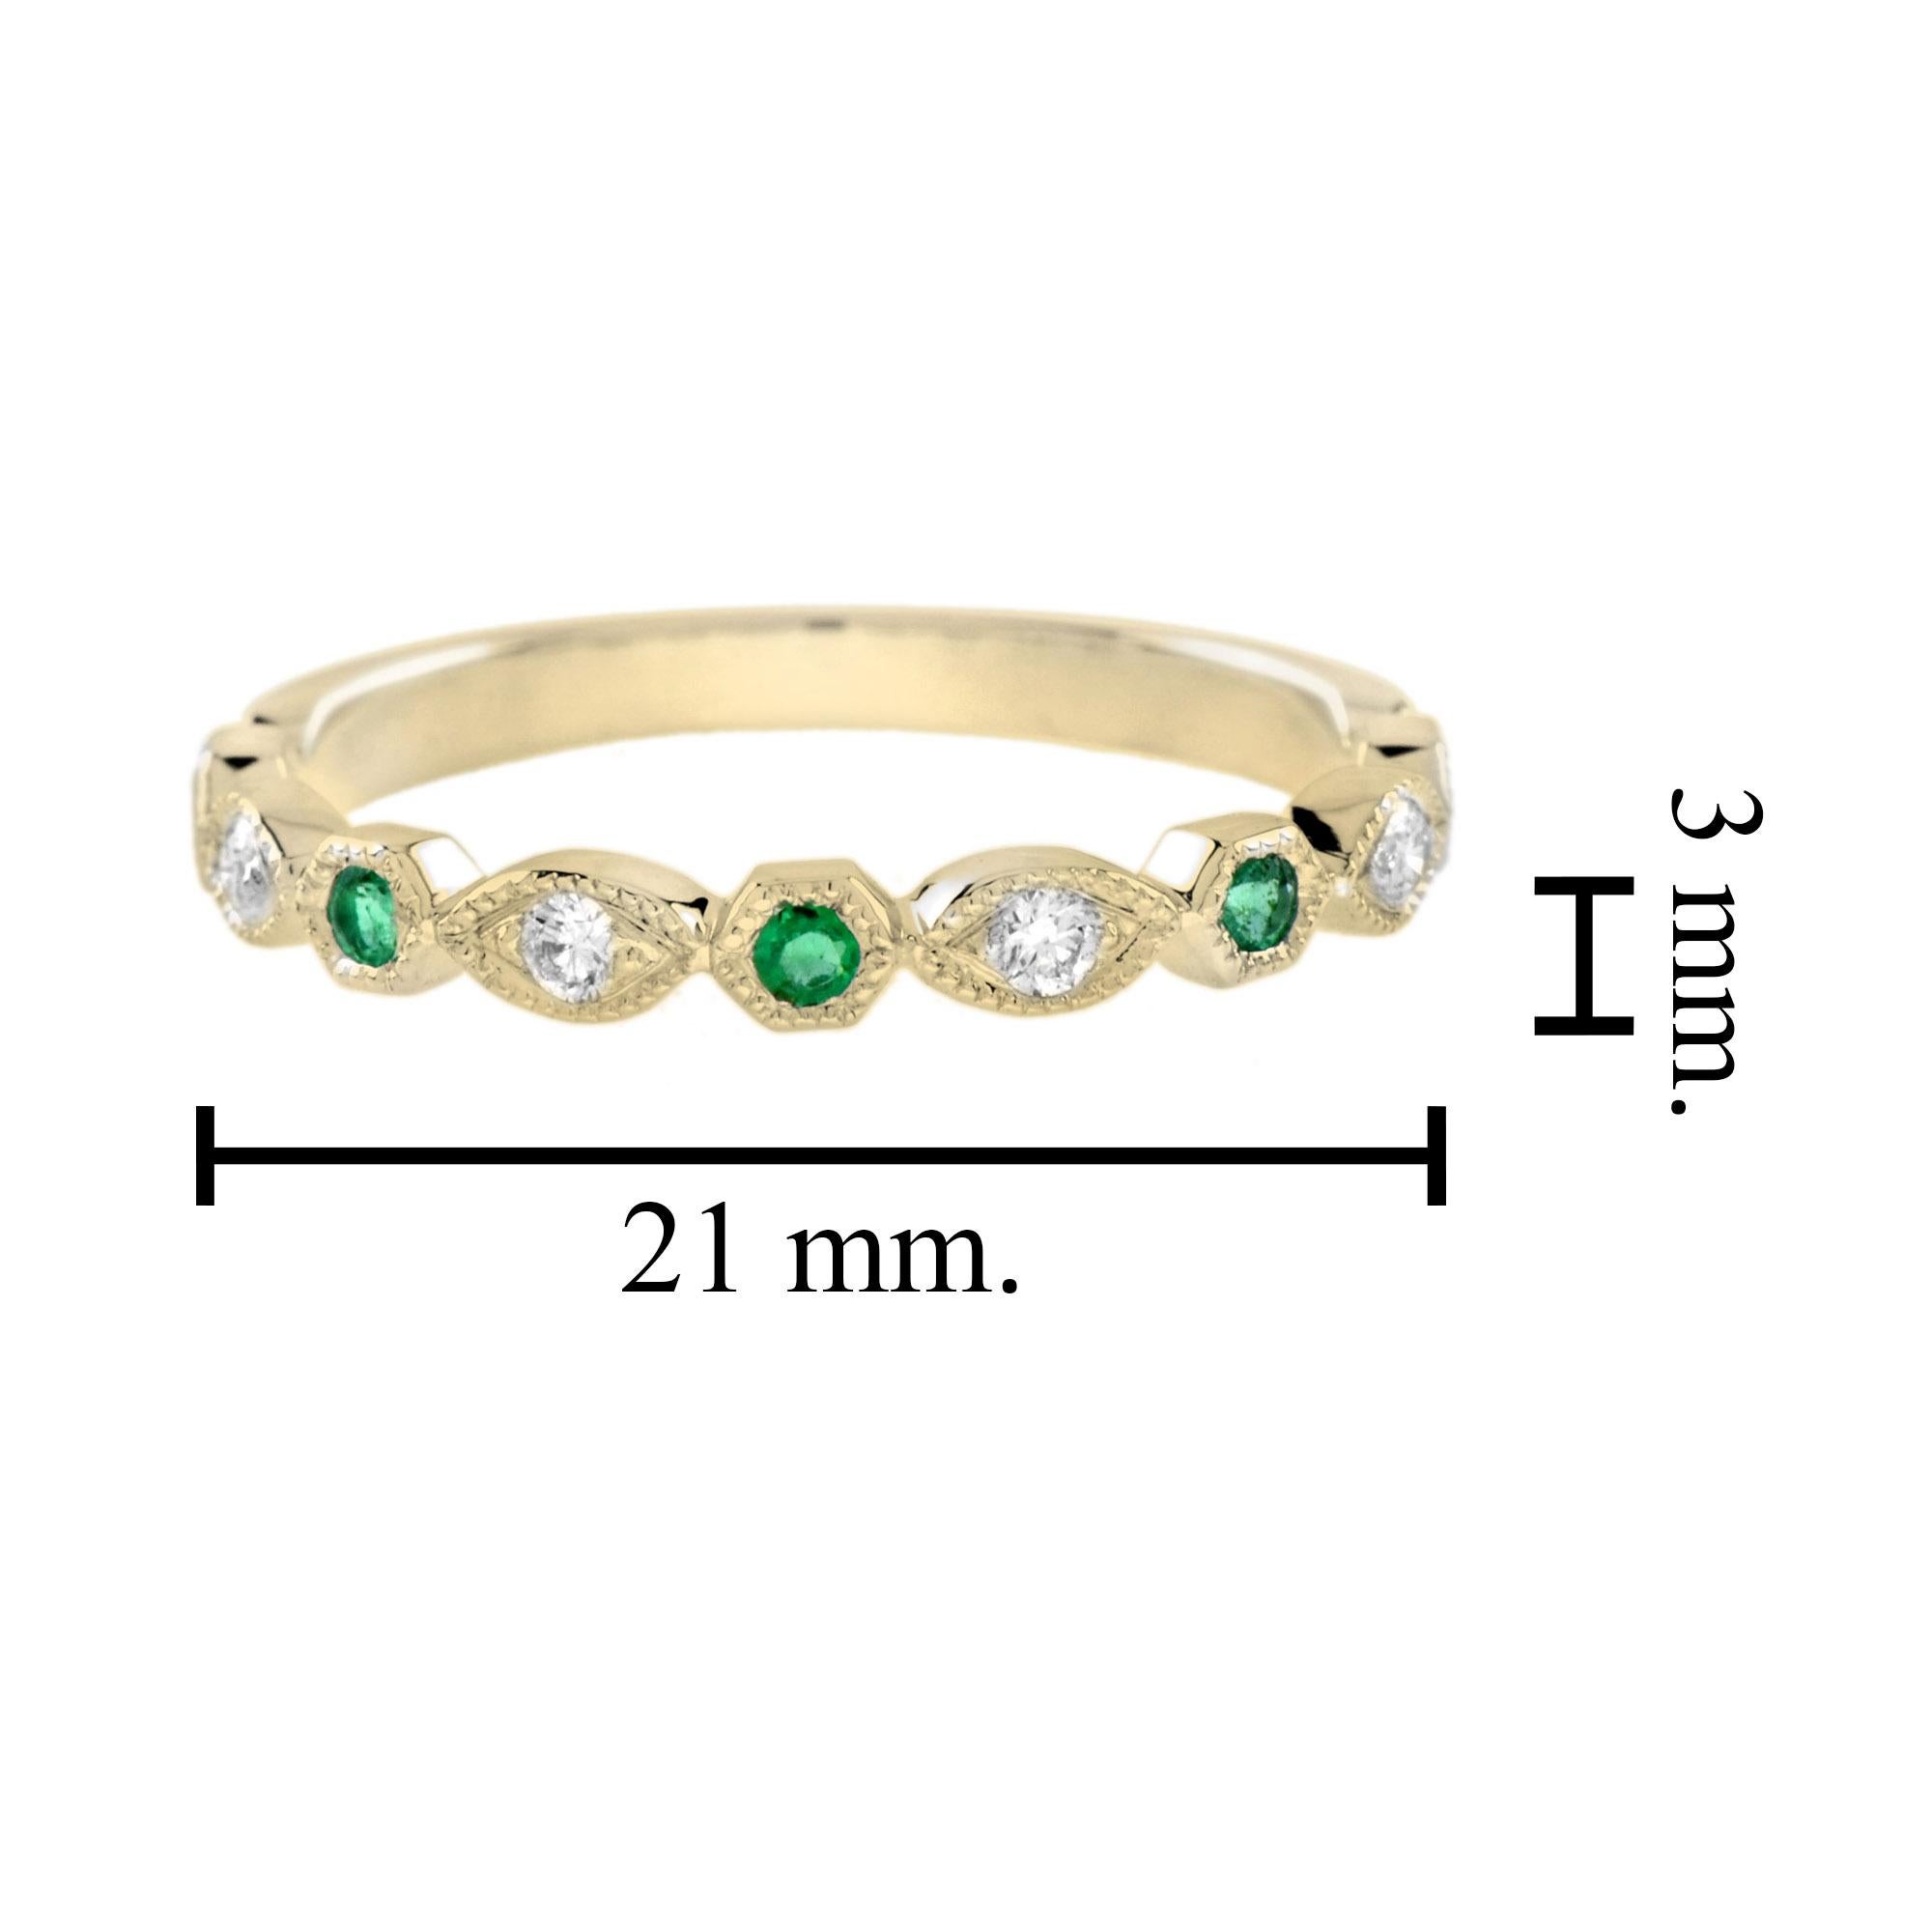 For Sale:  Emerald and Diamond Vintage Style Half Eternity Band Ring in 14K Yellow Gold 6